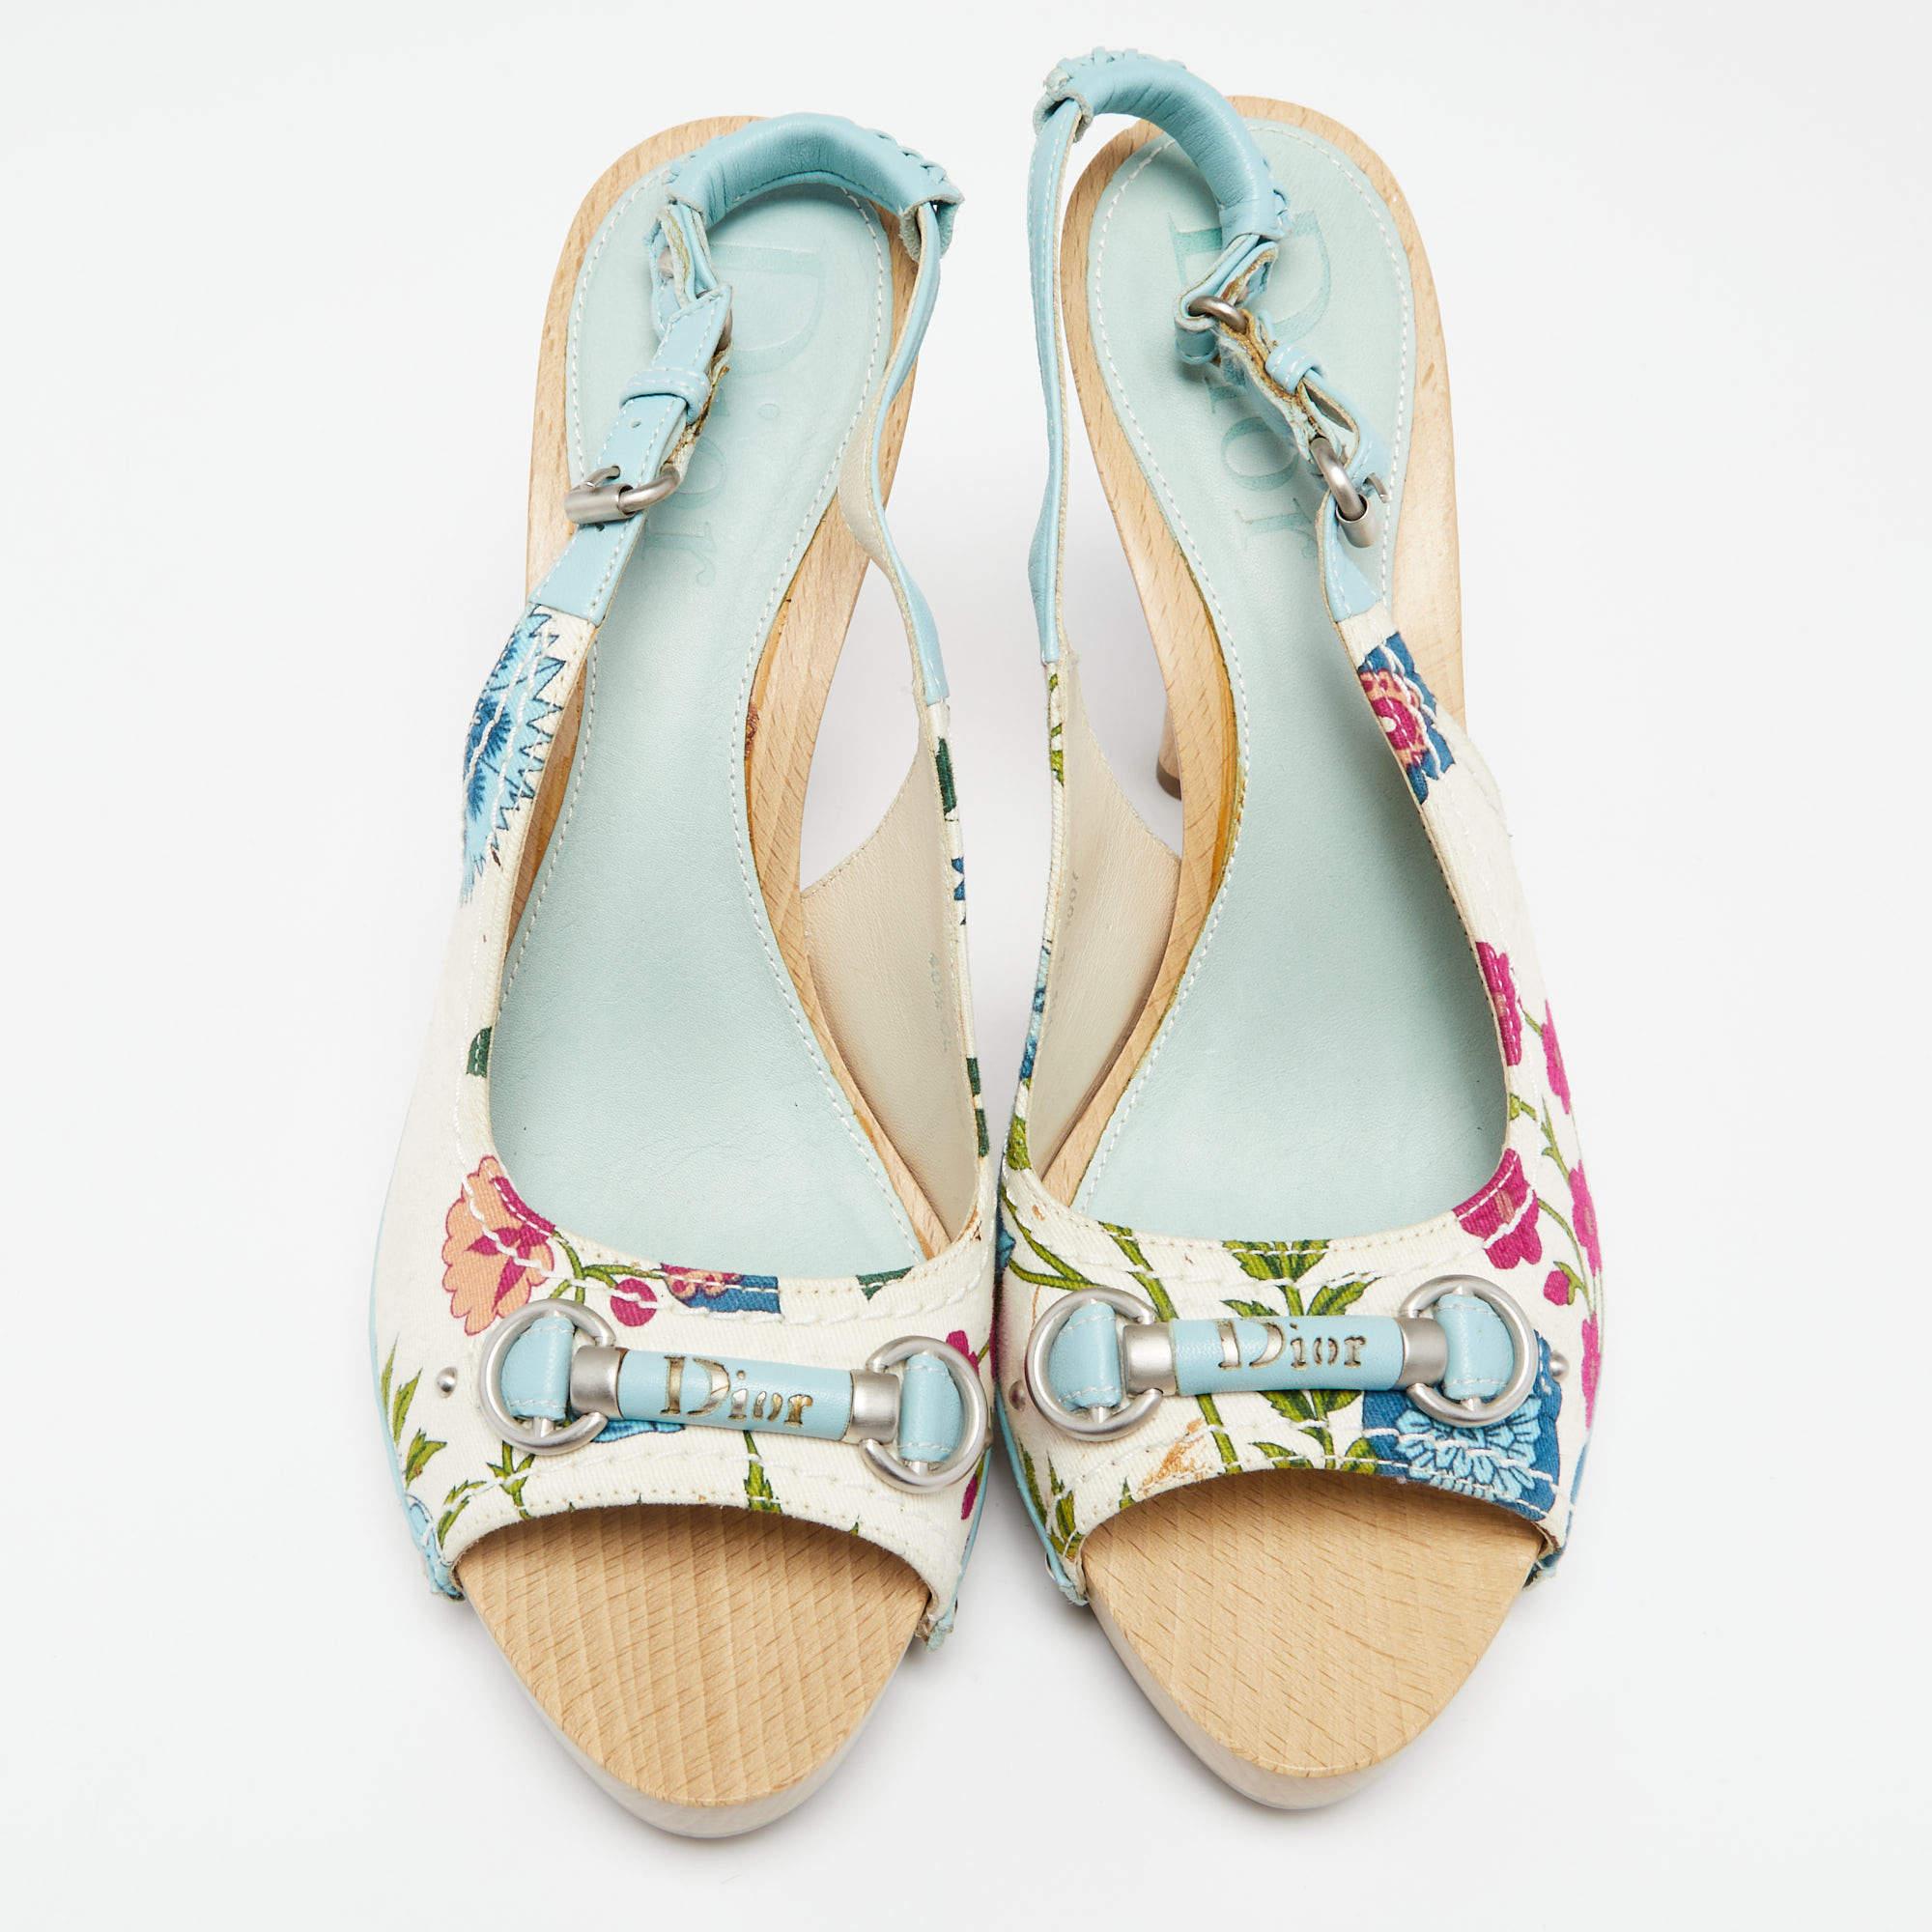 Constructed from printed canvas and leather into an effortless design, these sandals by Dior will frame your feet beautifully. The shoes feature a logo detail on the uppers, buckle slingback closure, and the base is set on platforms and 12 cm